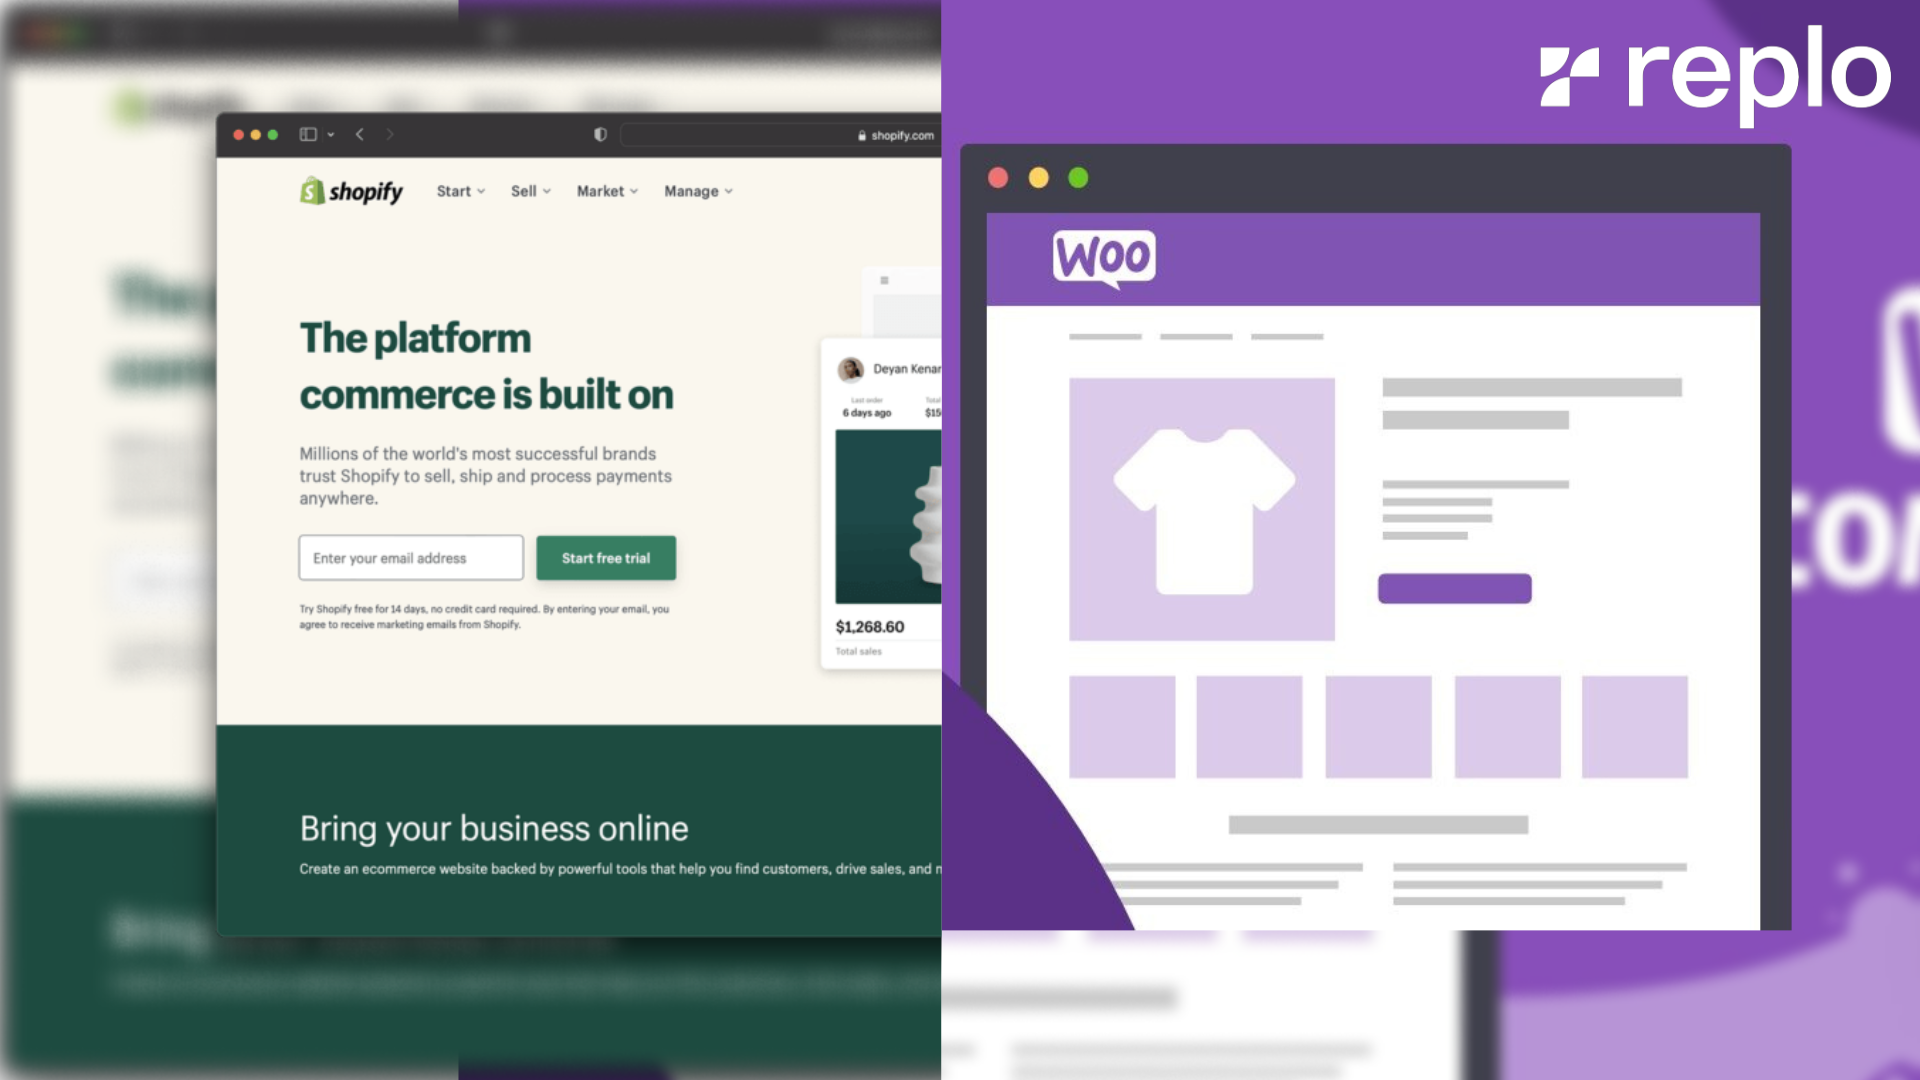 WooCommerce vs. Shopify: What’s The Best Platform And Why?